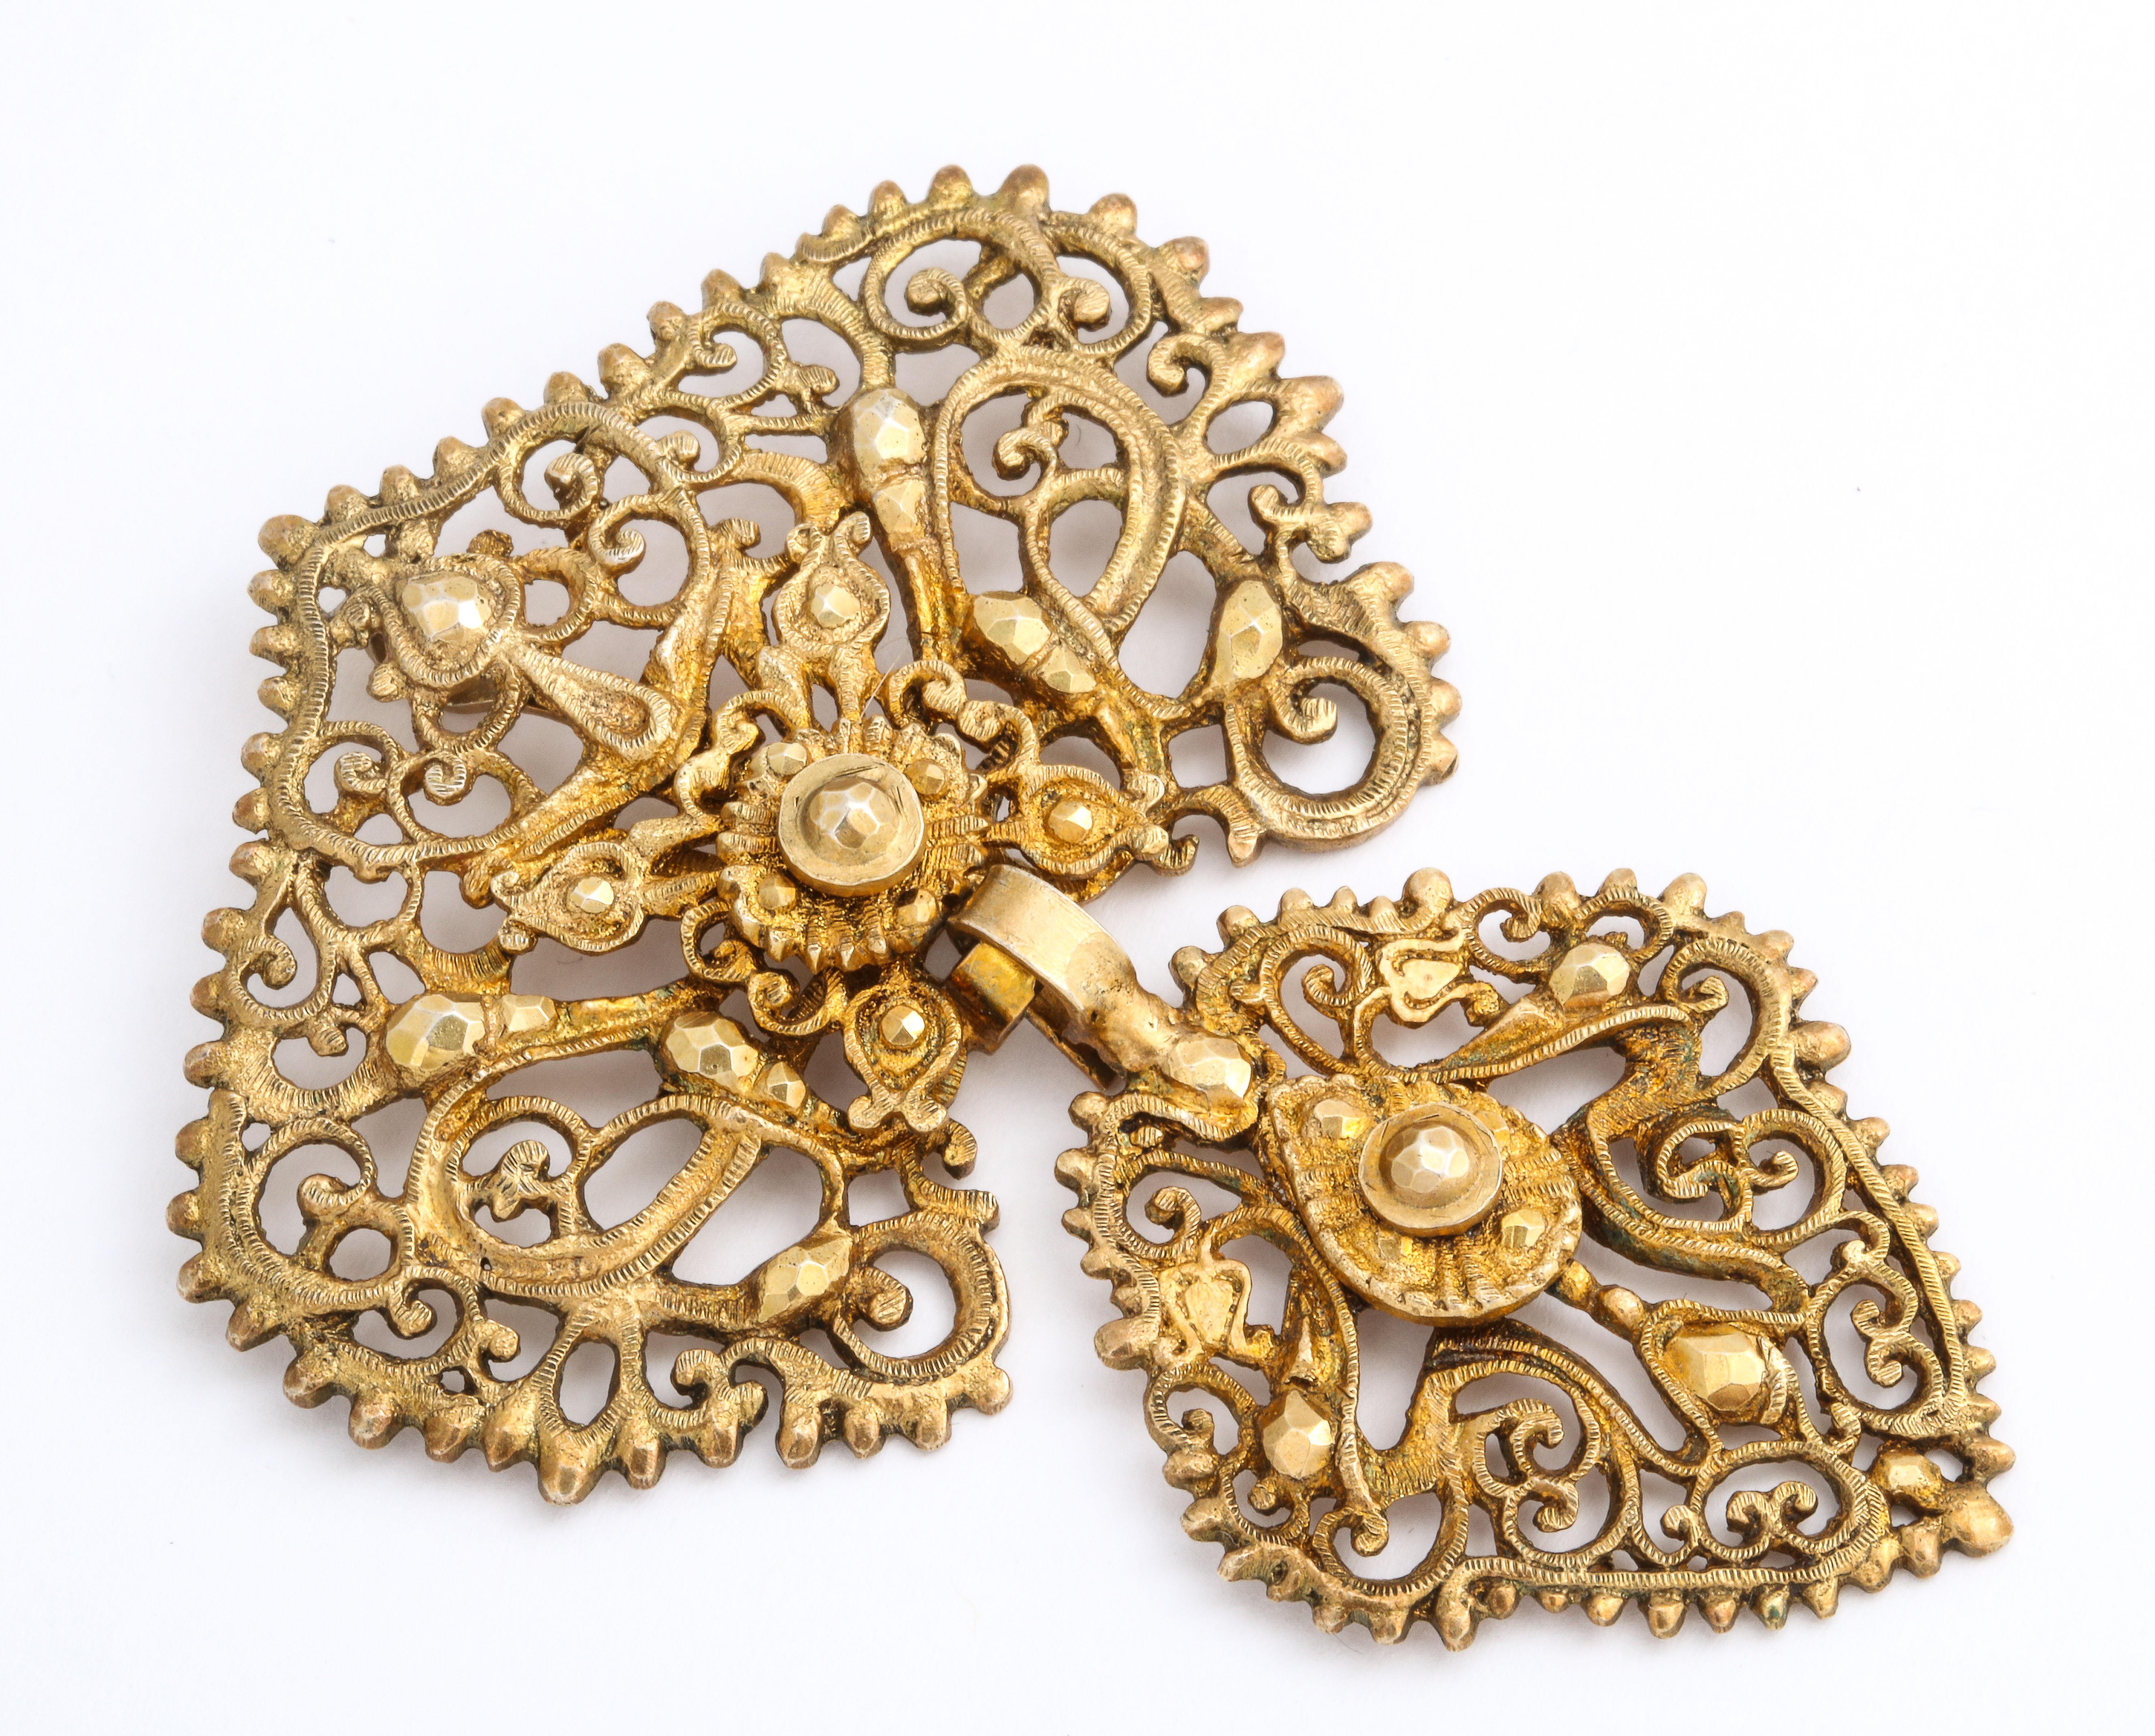 Proving that all beautiful jewelry can be other than gold or silver, this Georgian pendant of lacy openwork in a floral vine motif mimics the real thing made c. 1800, yet this is gilded metal. Texture is all here with smooth and non smooth surfaces.